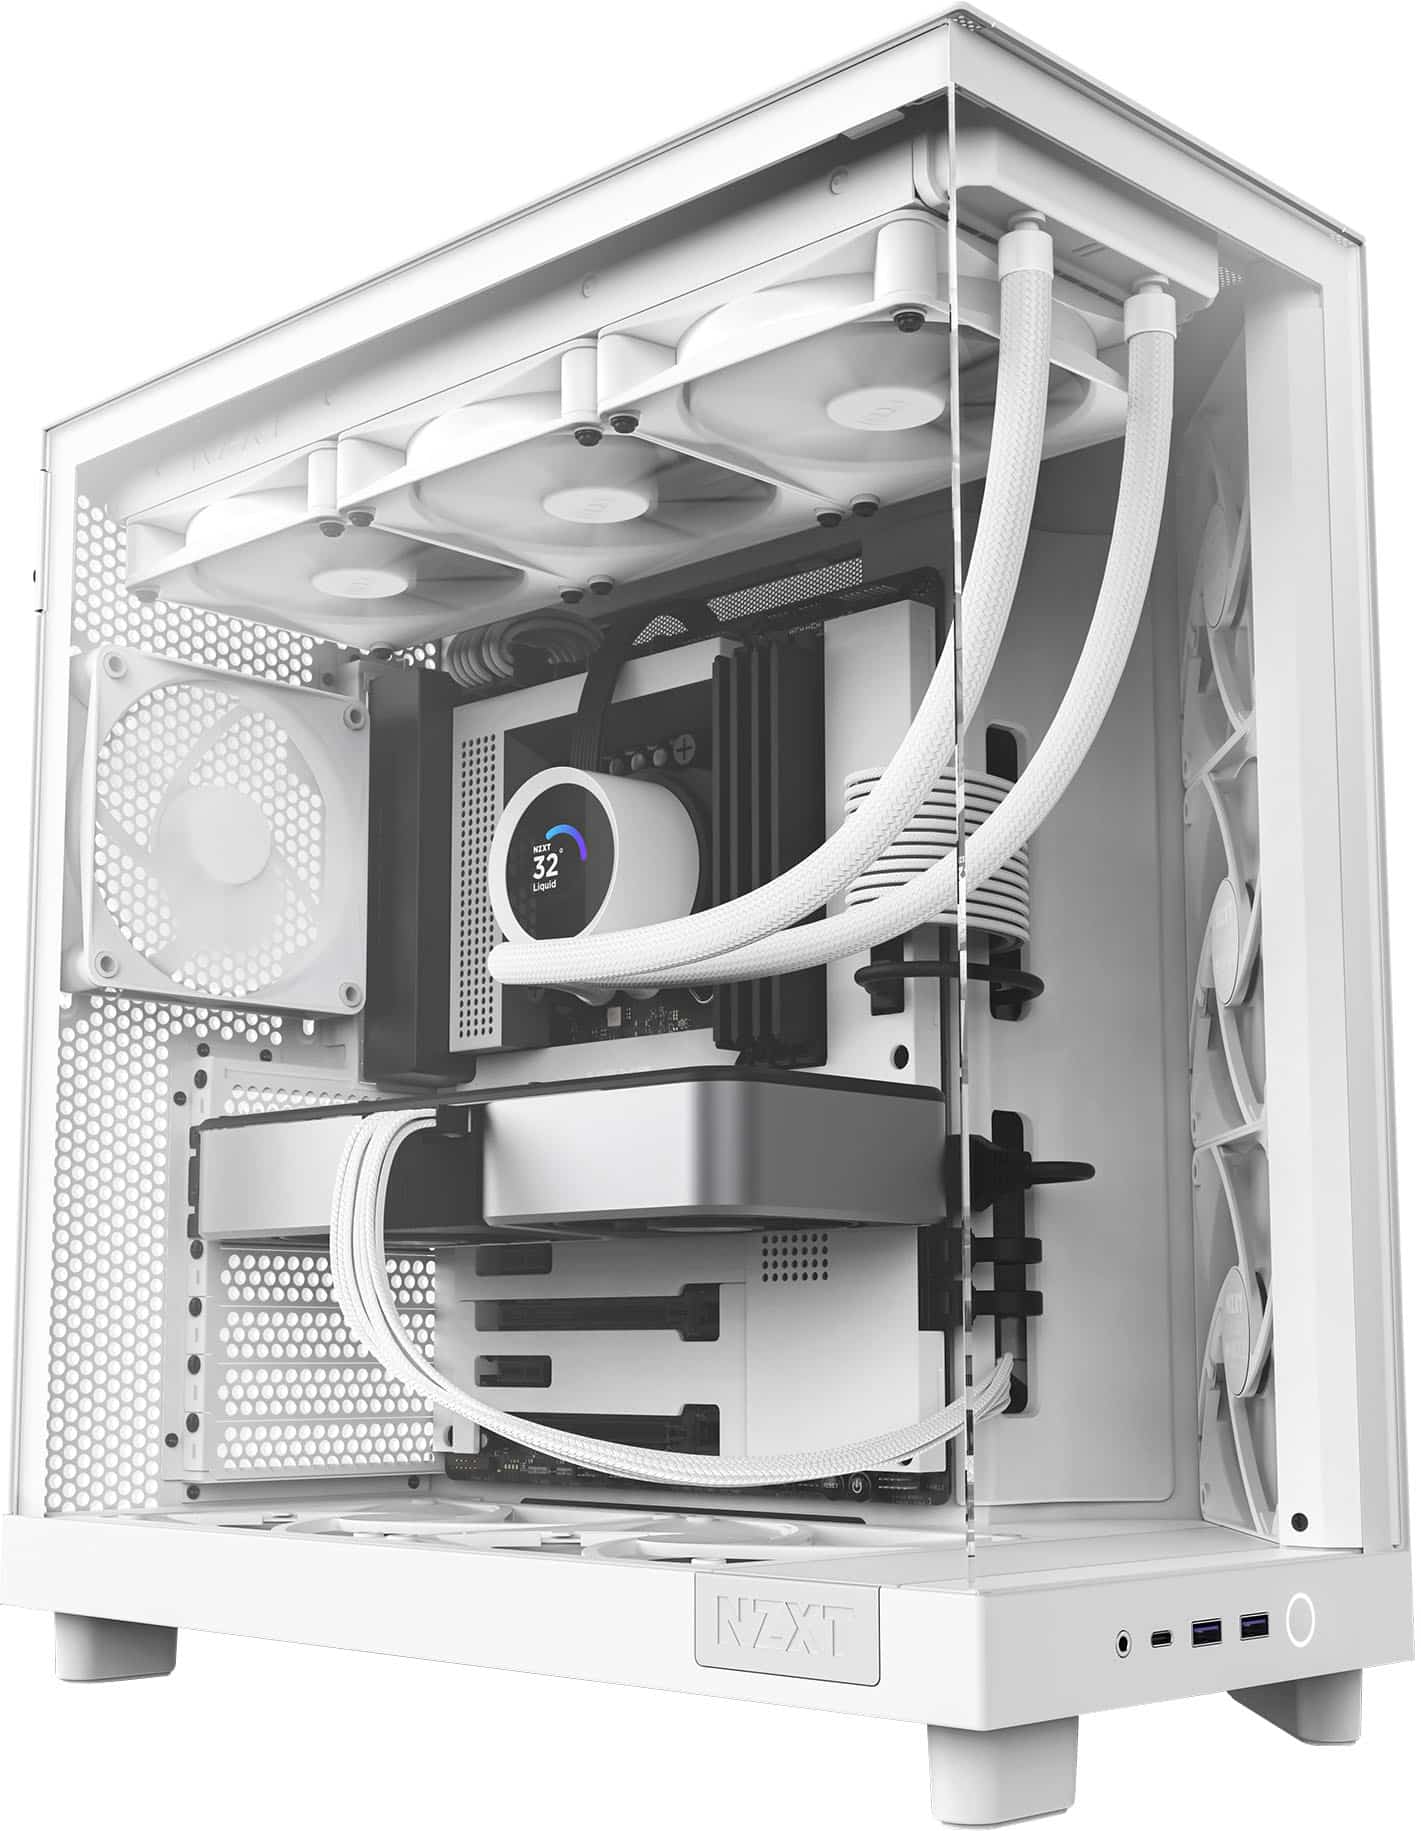 NZXT set to launch a non RGB version of the H6 Flow case